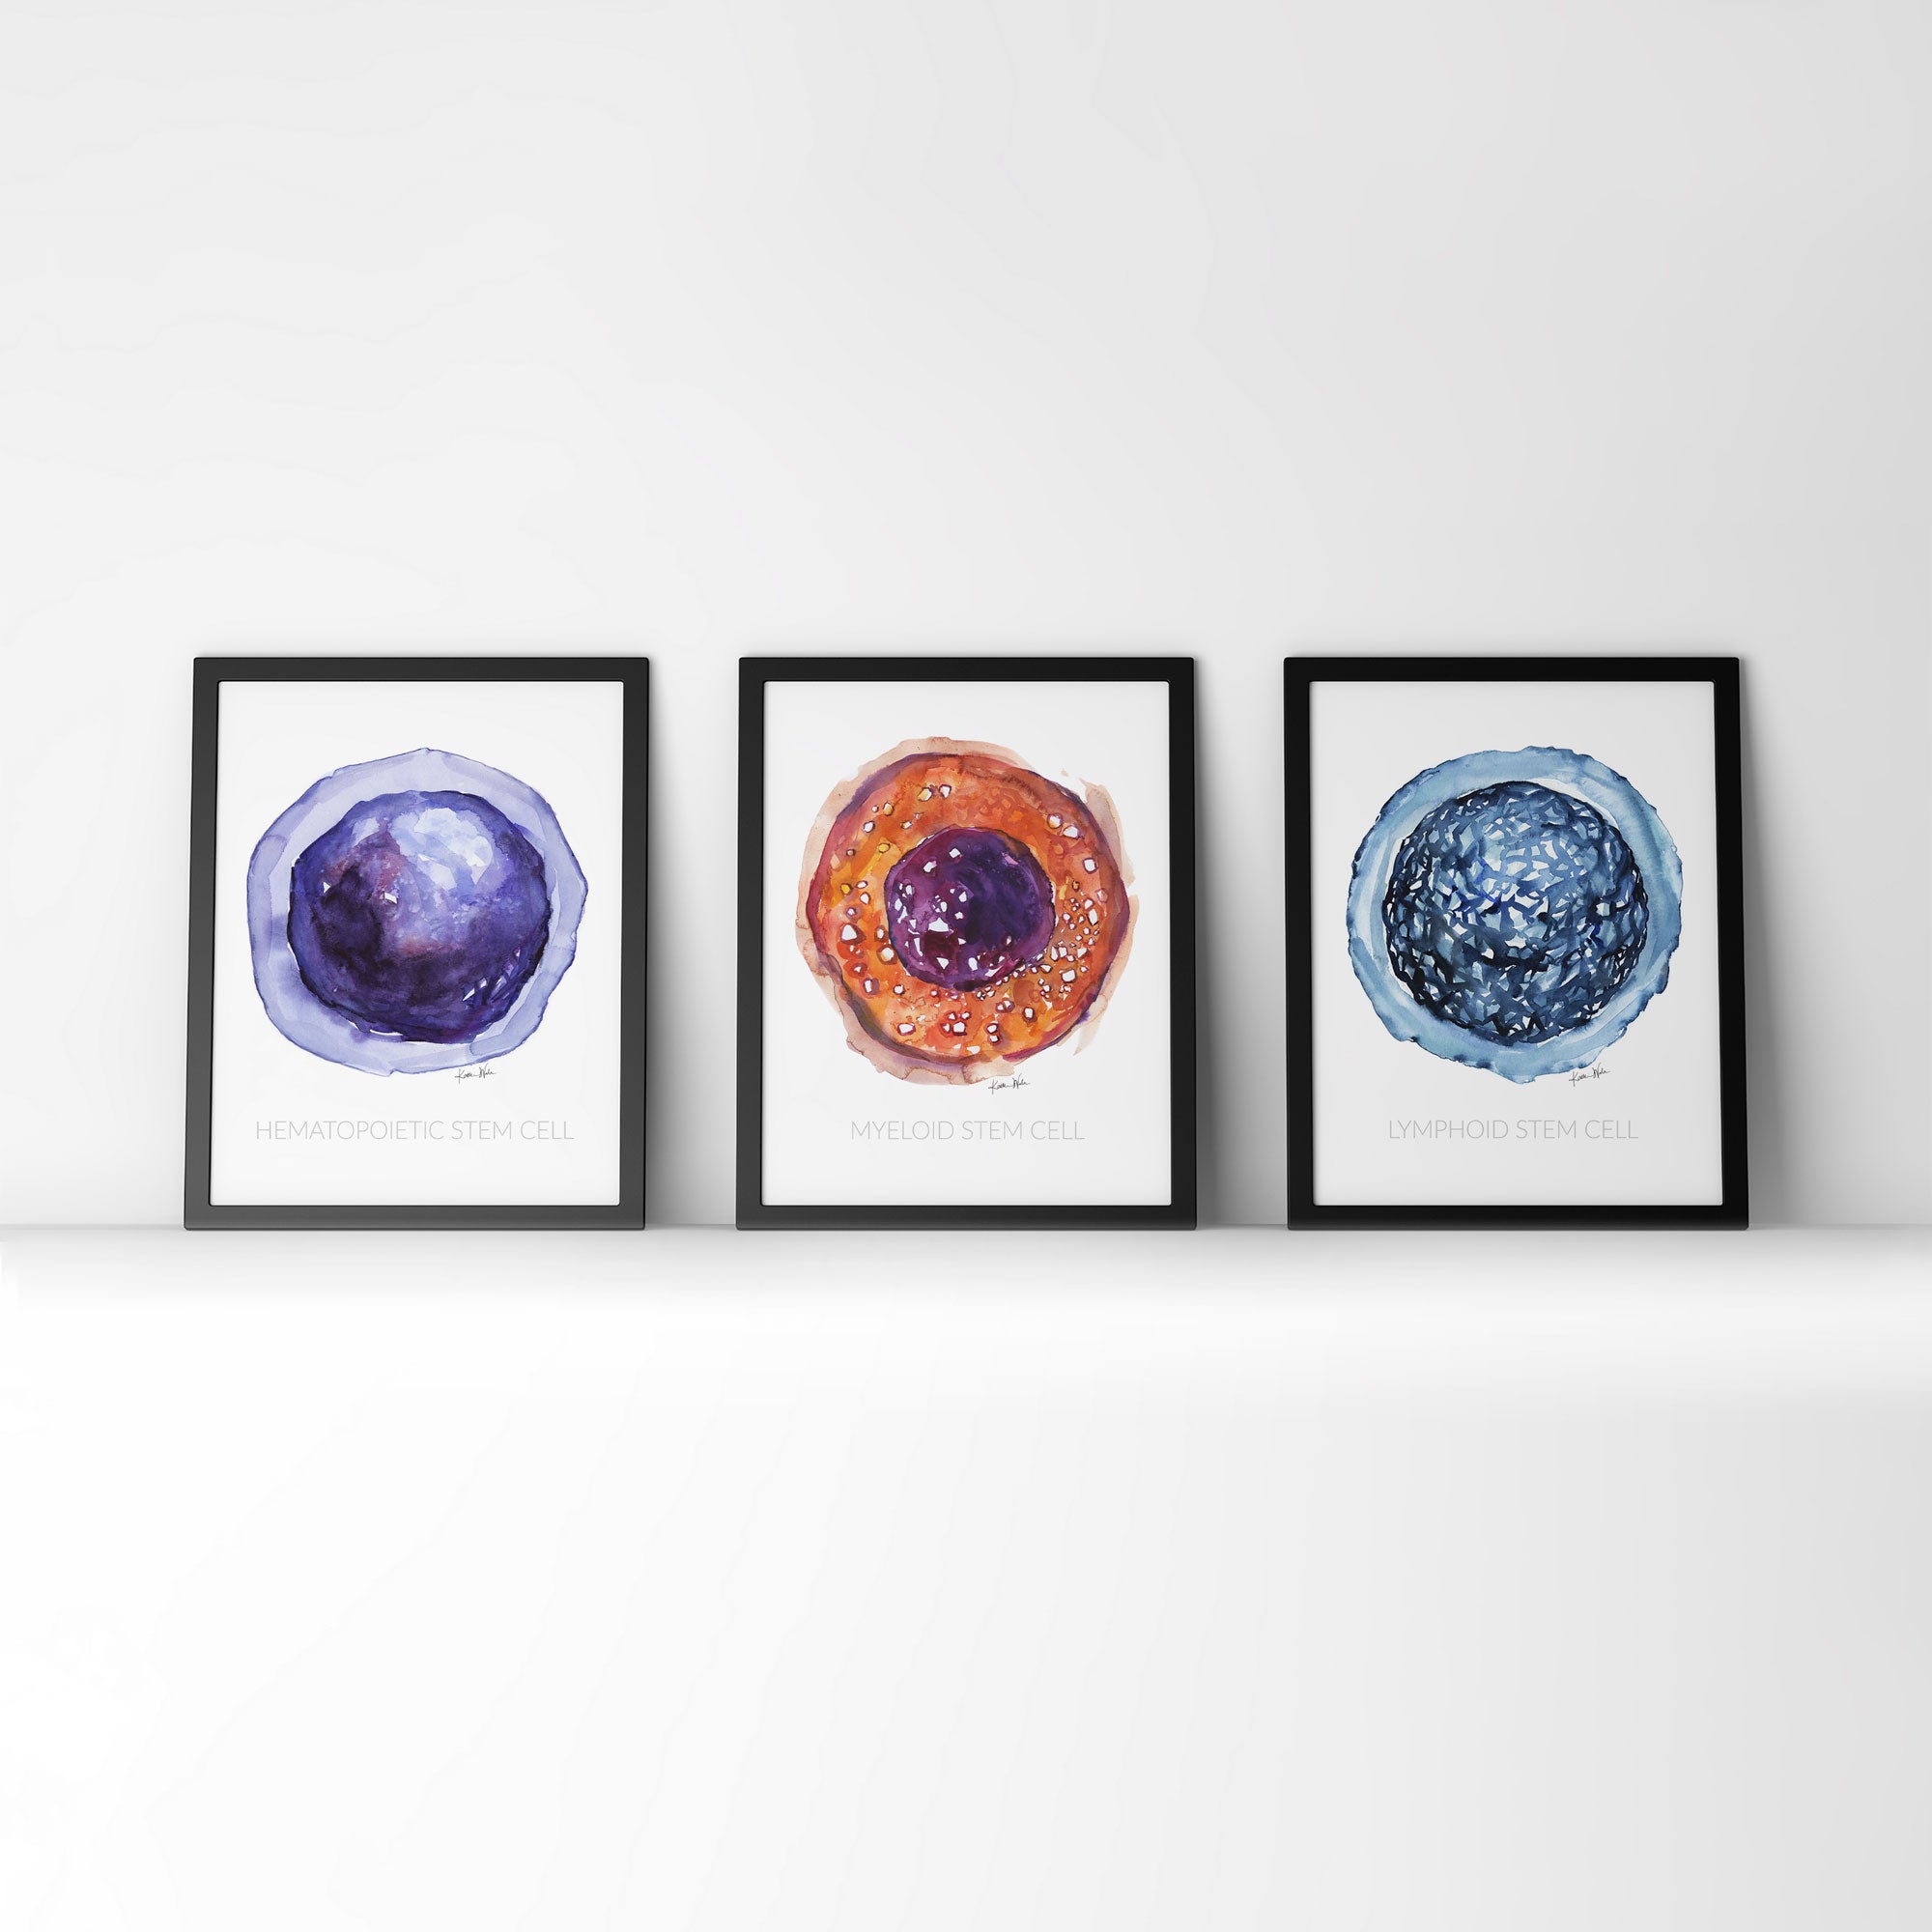 Framed watercolor painting set of stem cells.